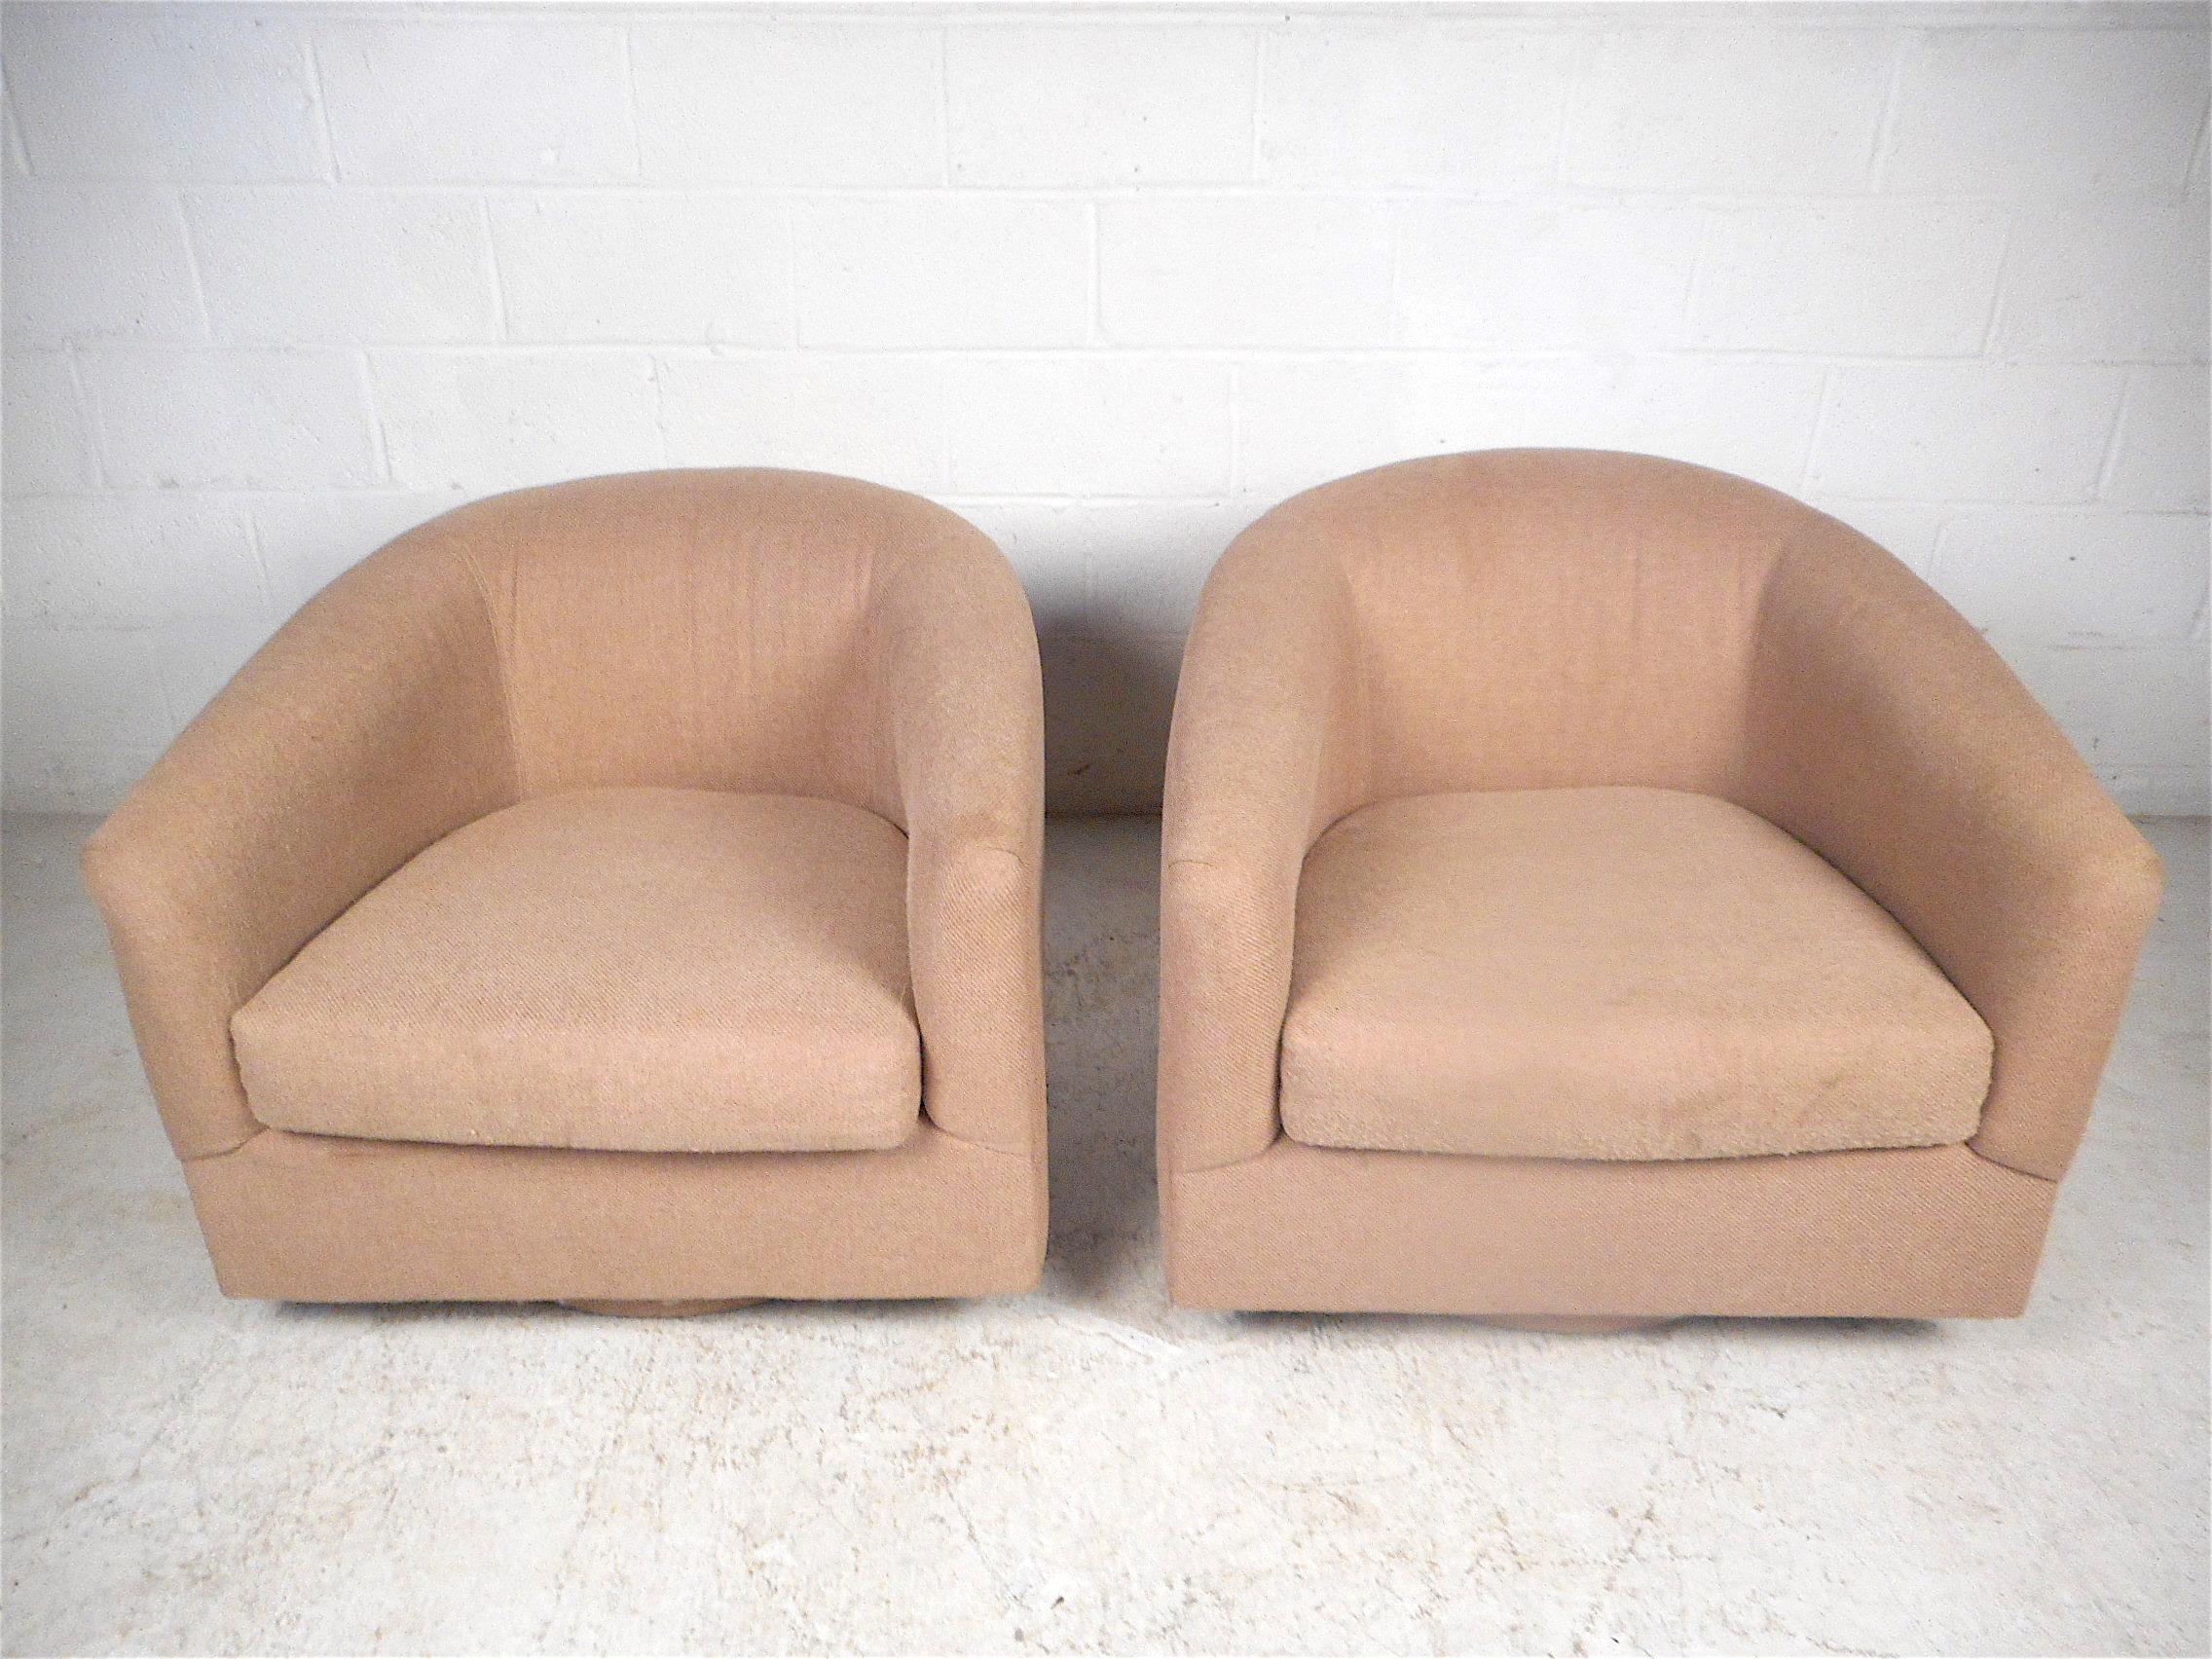 Stylish pair of midcentury lounge chairs on swiveling bases. Spacious seating area with soft cushioning, circa 1980s. Great pair of chairs sure to make an impression in any modern interior. Please confirm item location with dealer (NJ or NY).